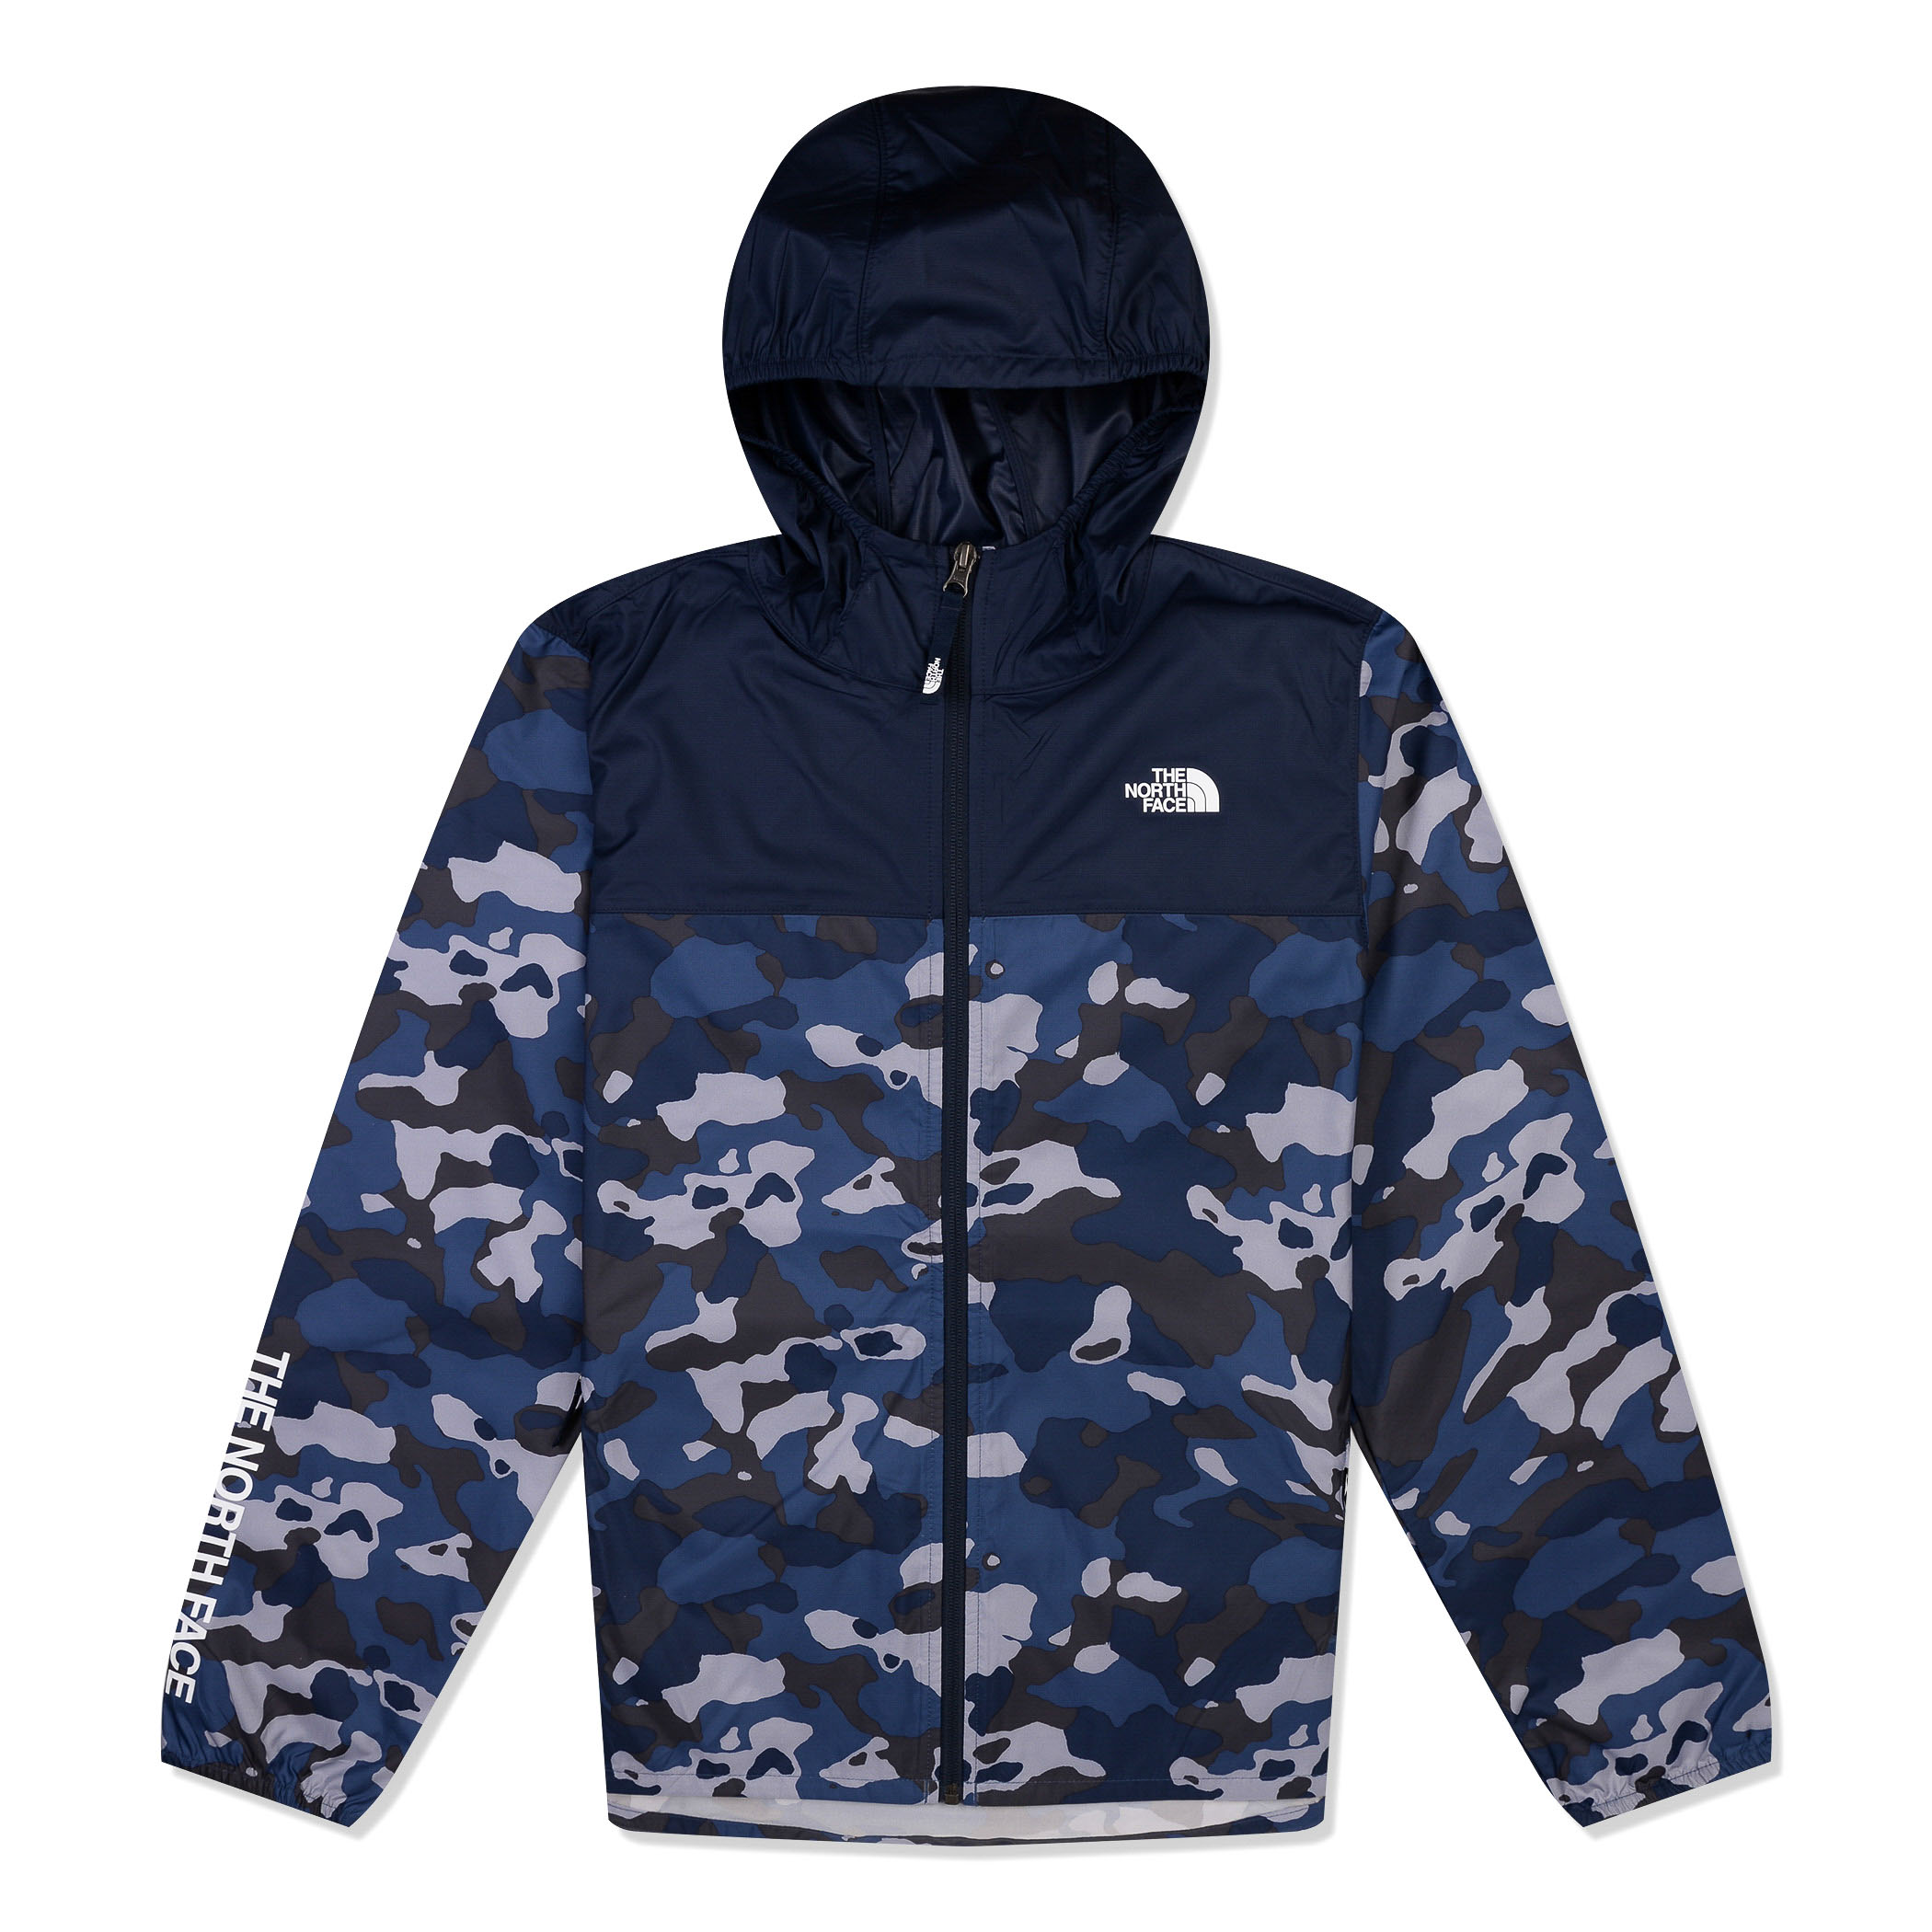 north face reactor wind